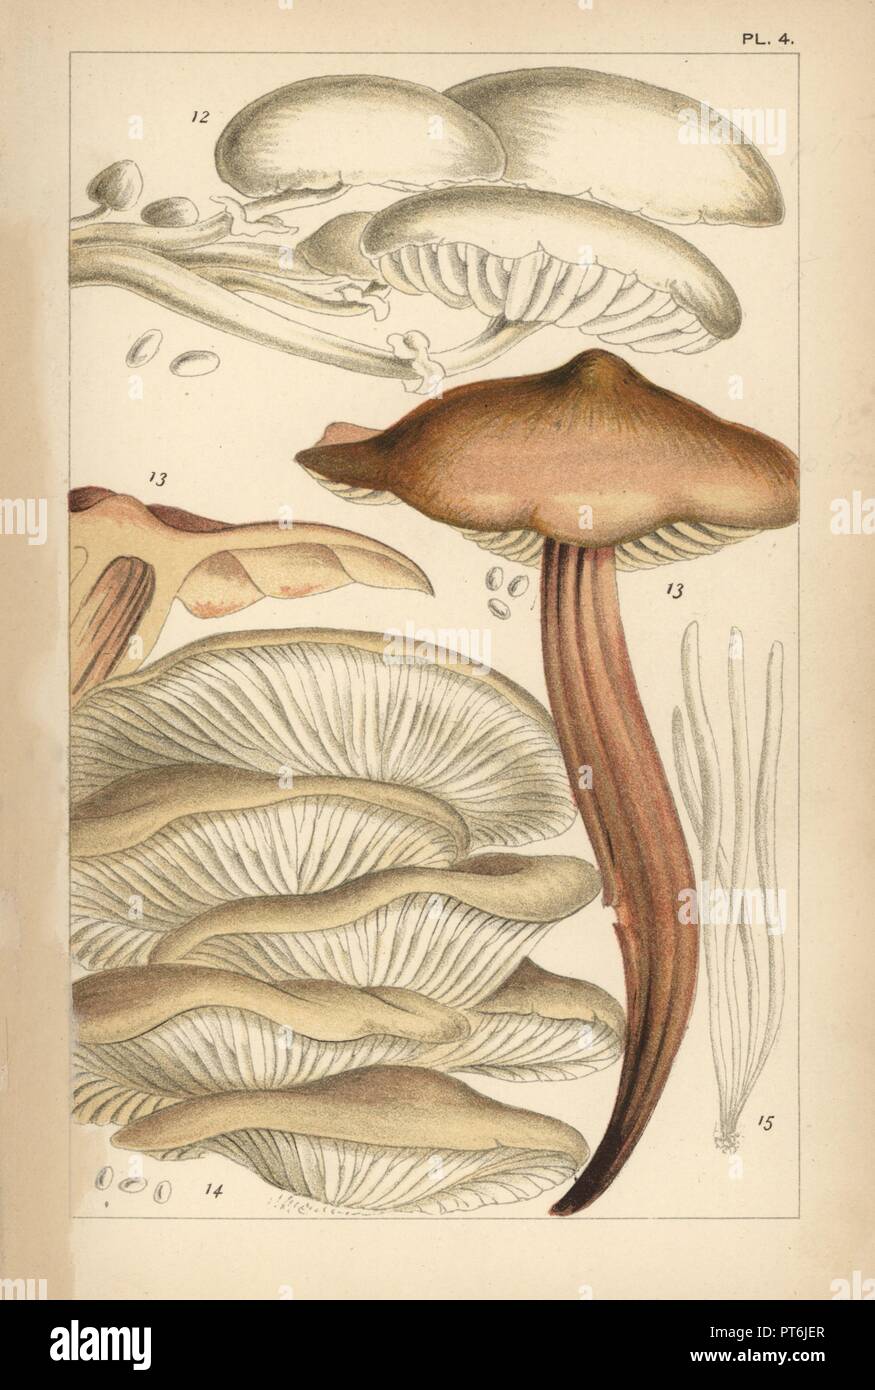 Porcelain mushroom, Oudemansiella mucida 12, spindleshank, Gymnopus fusipes 13, oyster mushroom, Pleurotus ostreatus 14 and fairy fingers, Clavaria fragilis 15. Chromolithograph after an illustration by M. C. Cooke from his own 'British Edible Fungi, how to distinguish and how to cook them,' London, Kegan Paul, 1891. Mordecai Cubitt Cooke (1825-1914) was a British botanist, mycologist and artist. He was curator a the India Musuem from 1860 to 1879, when he transferred along with the botanical collection to the Royal Botanic Gardens, Kew. Stock Photo